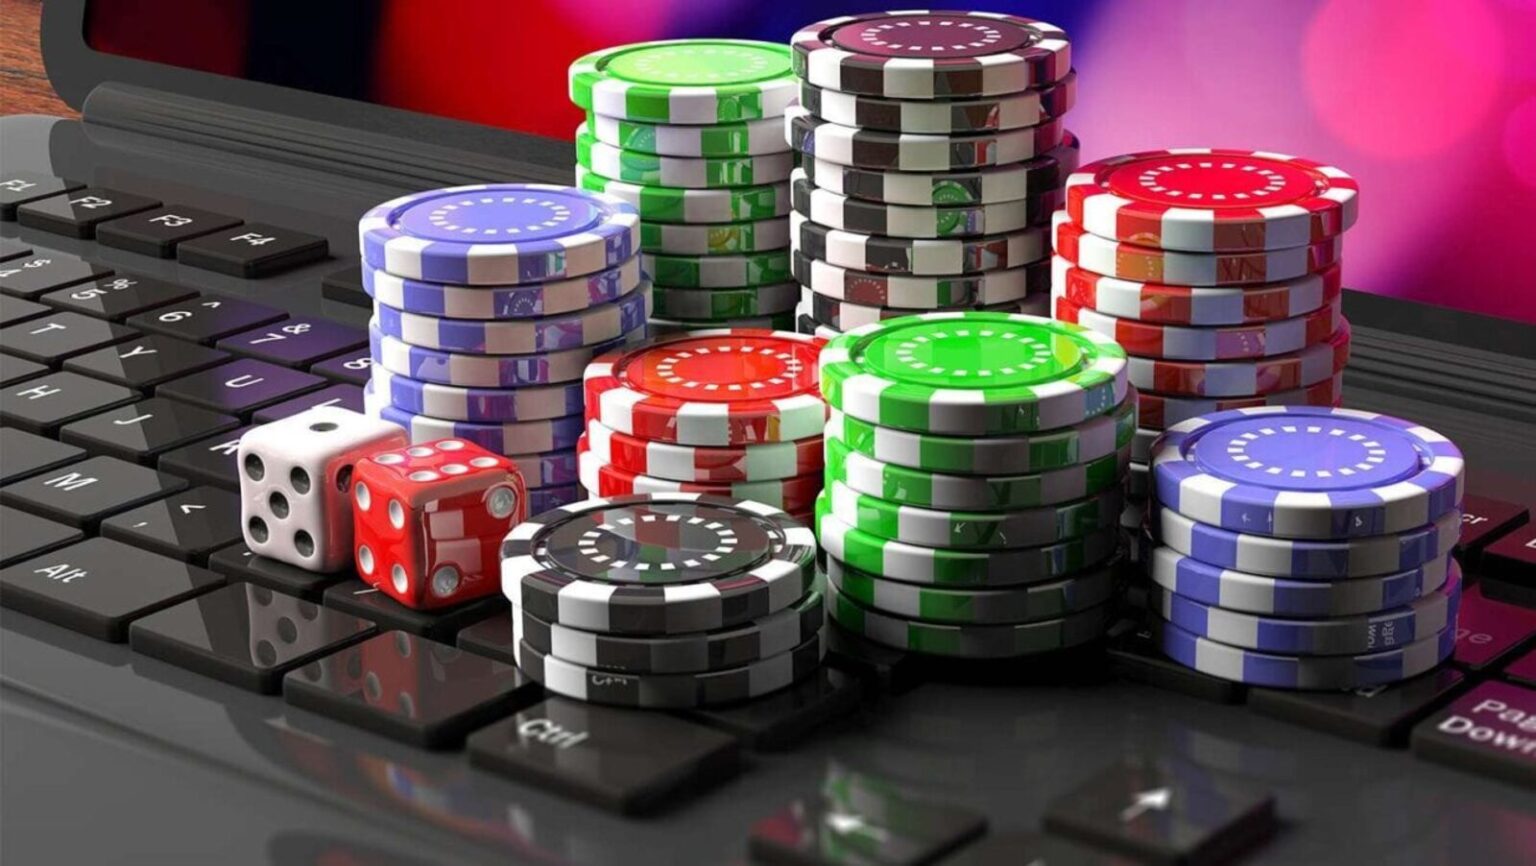 When it comes to online casinos, few can stand up to Voslot. Learn why more and more players are flocking to Voslot for all their favorite games.